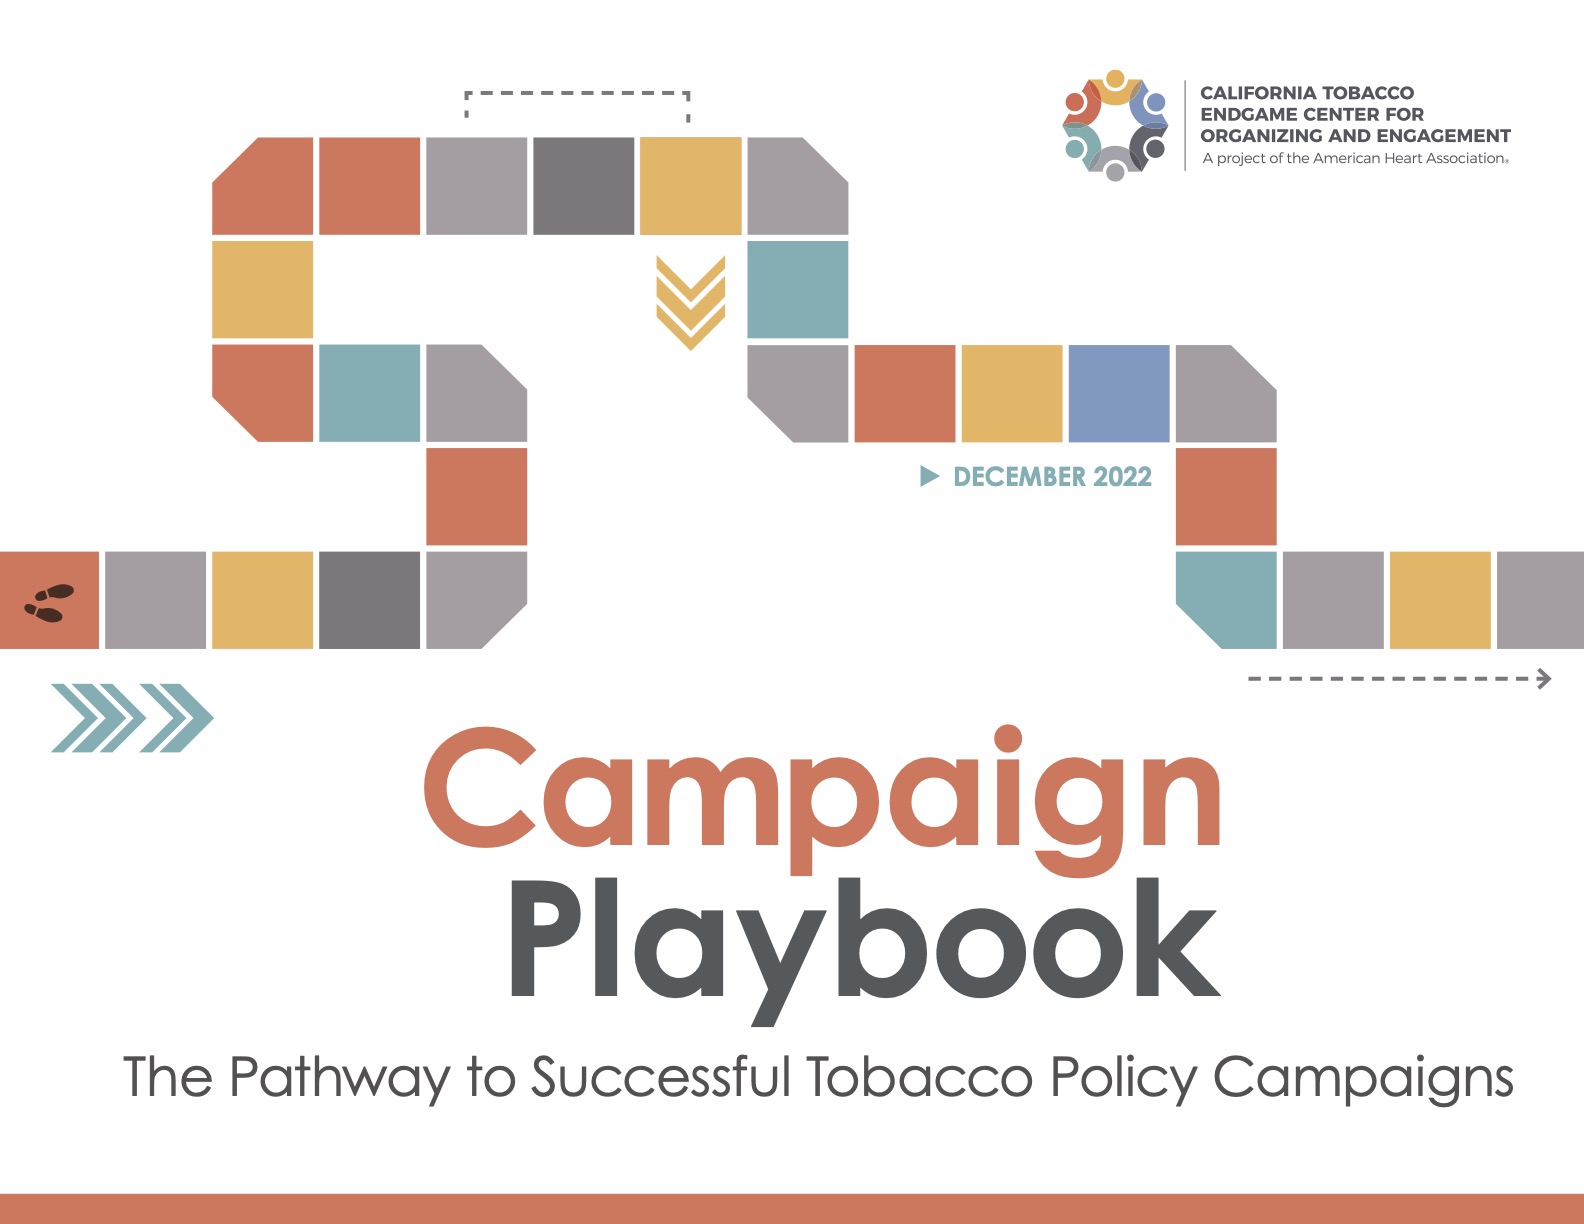 The Pathway to Successful Tobacco Policy Campaigns